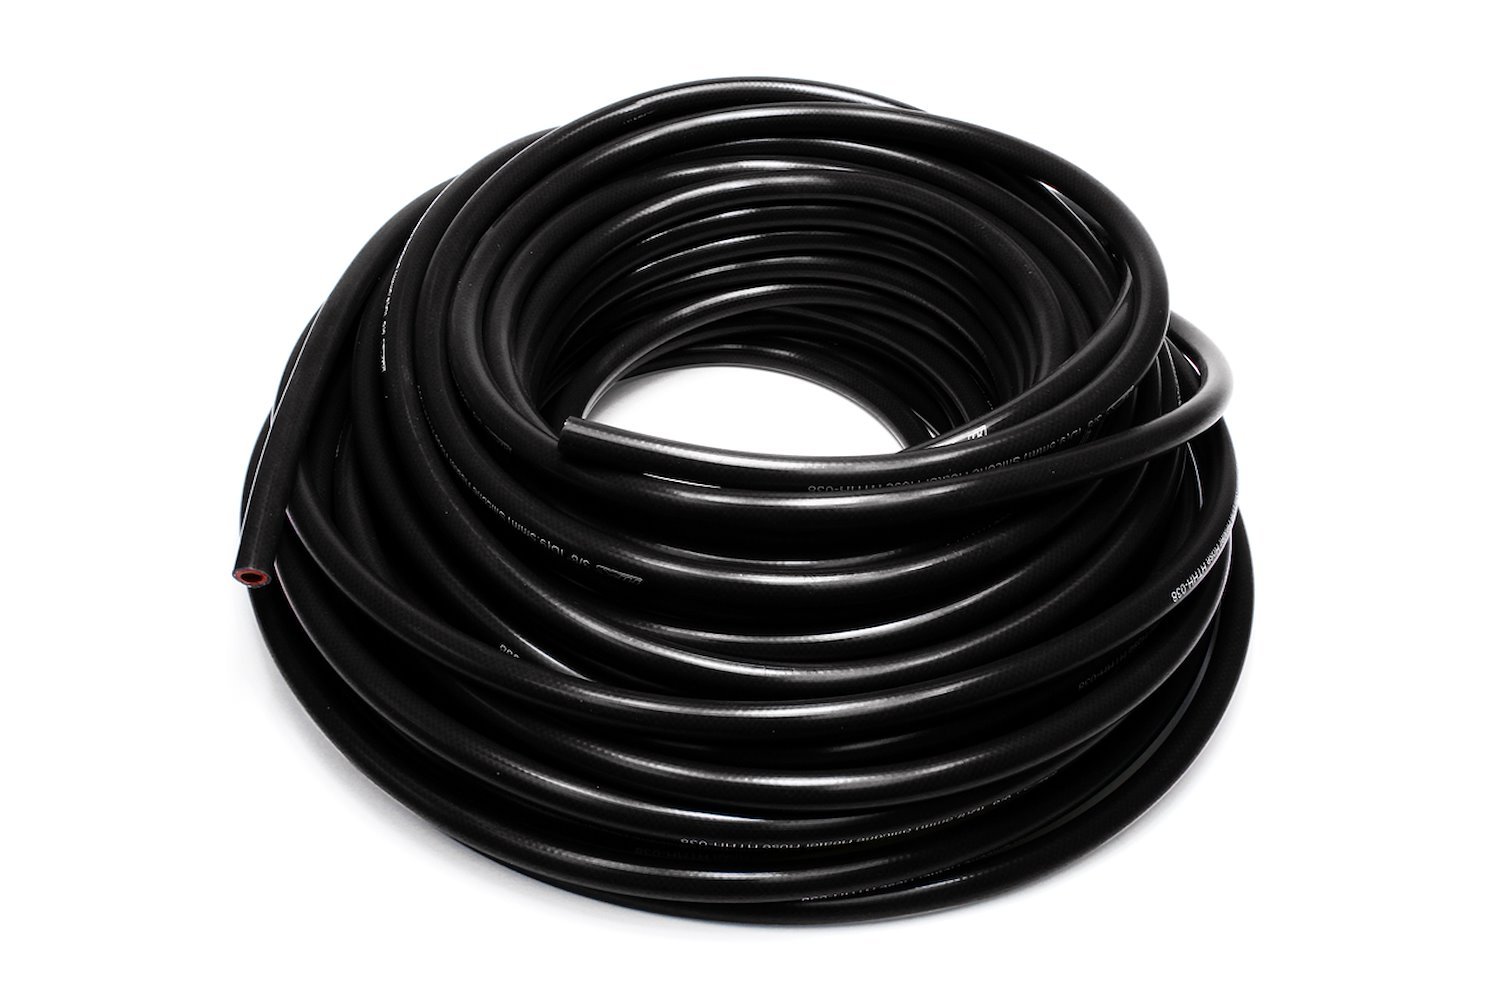 HTHH-016-BLKx100 Silicone Heater Hose Tubing, High-Temp Reinforced, 5/32 in. ID, 100 ft. Roll, Black